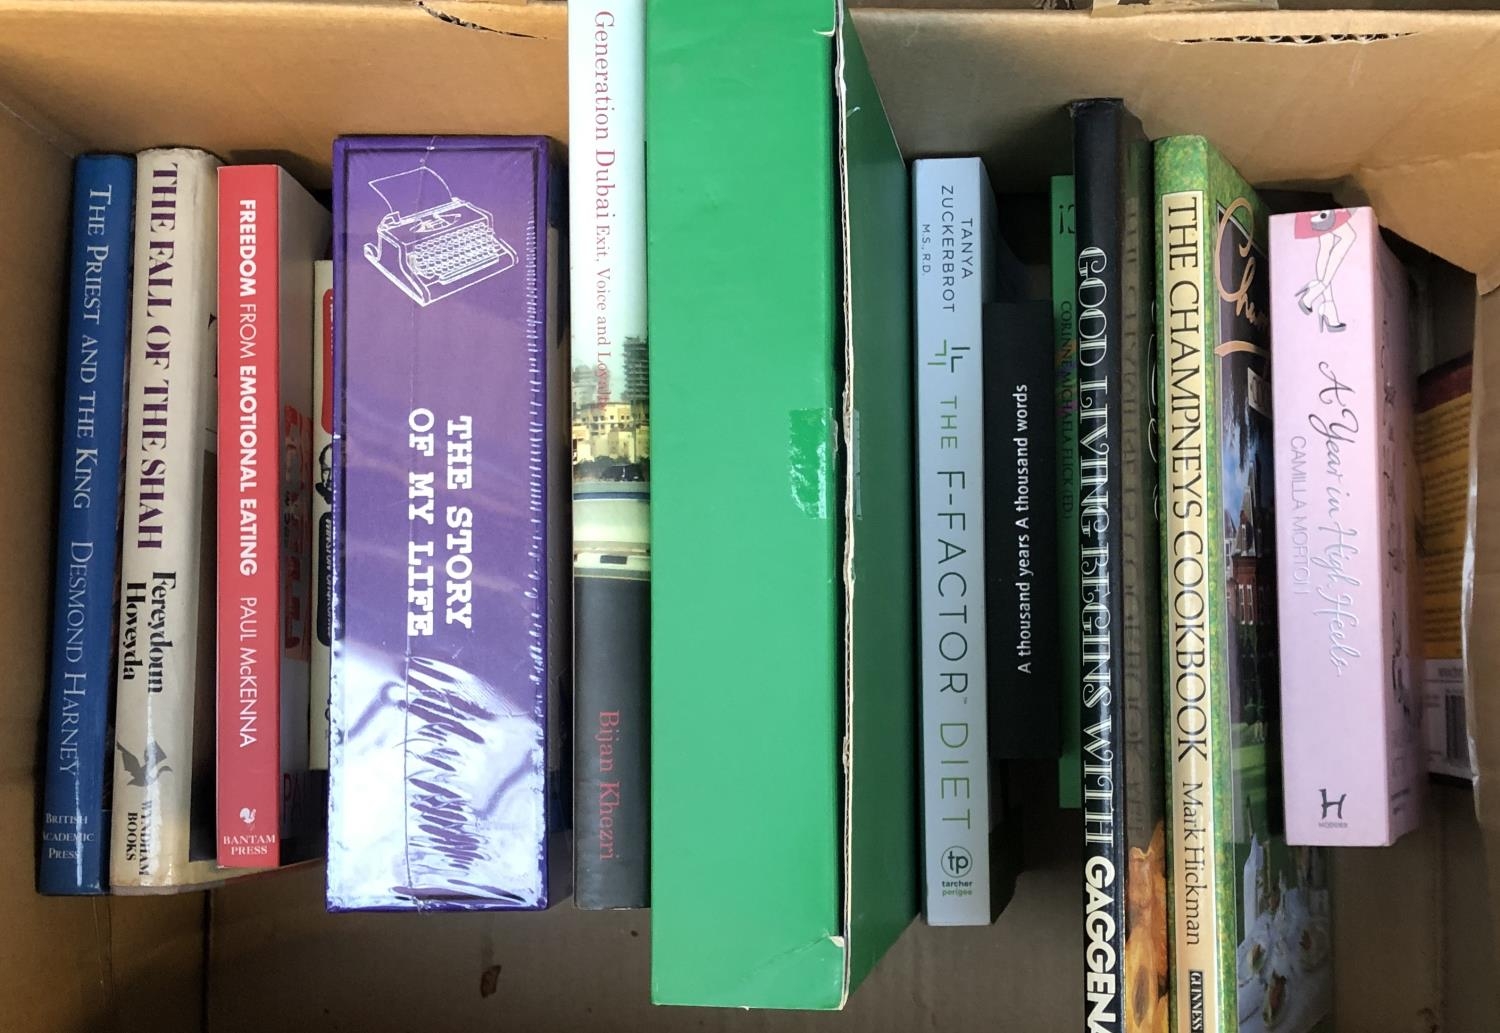 BOOKS: a miscellany. Three boxes - Middle East, Balzac (a uniform run), and others. - Image 2 of 3